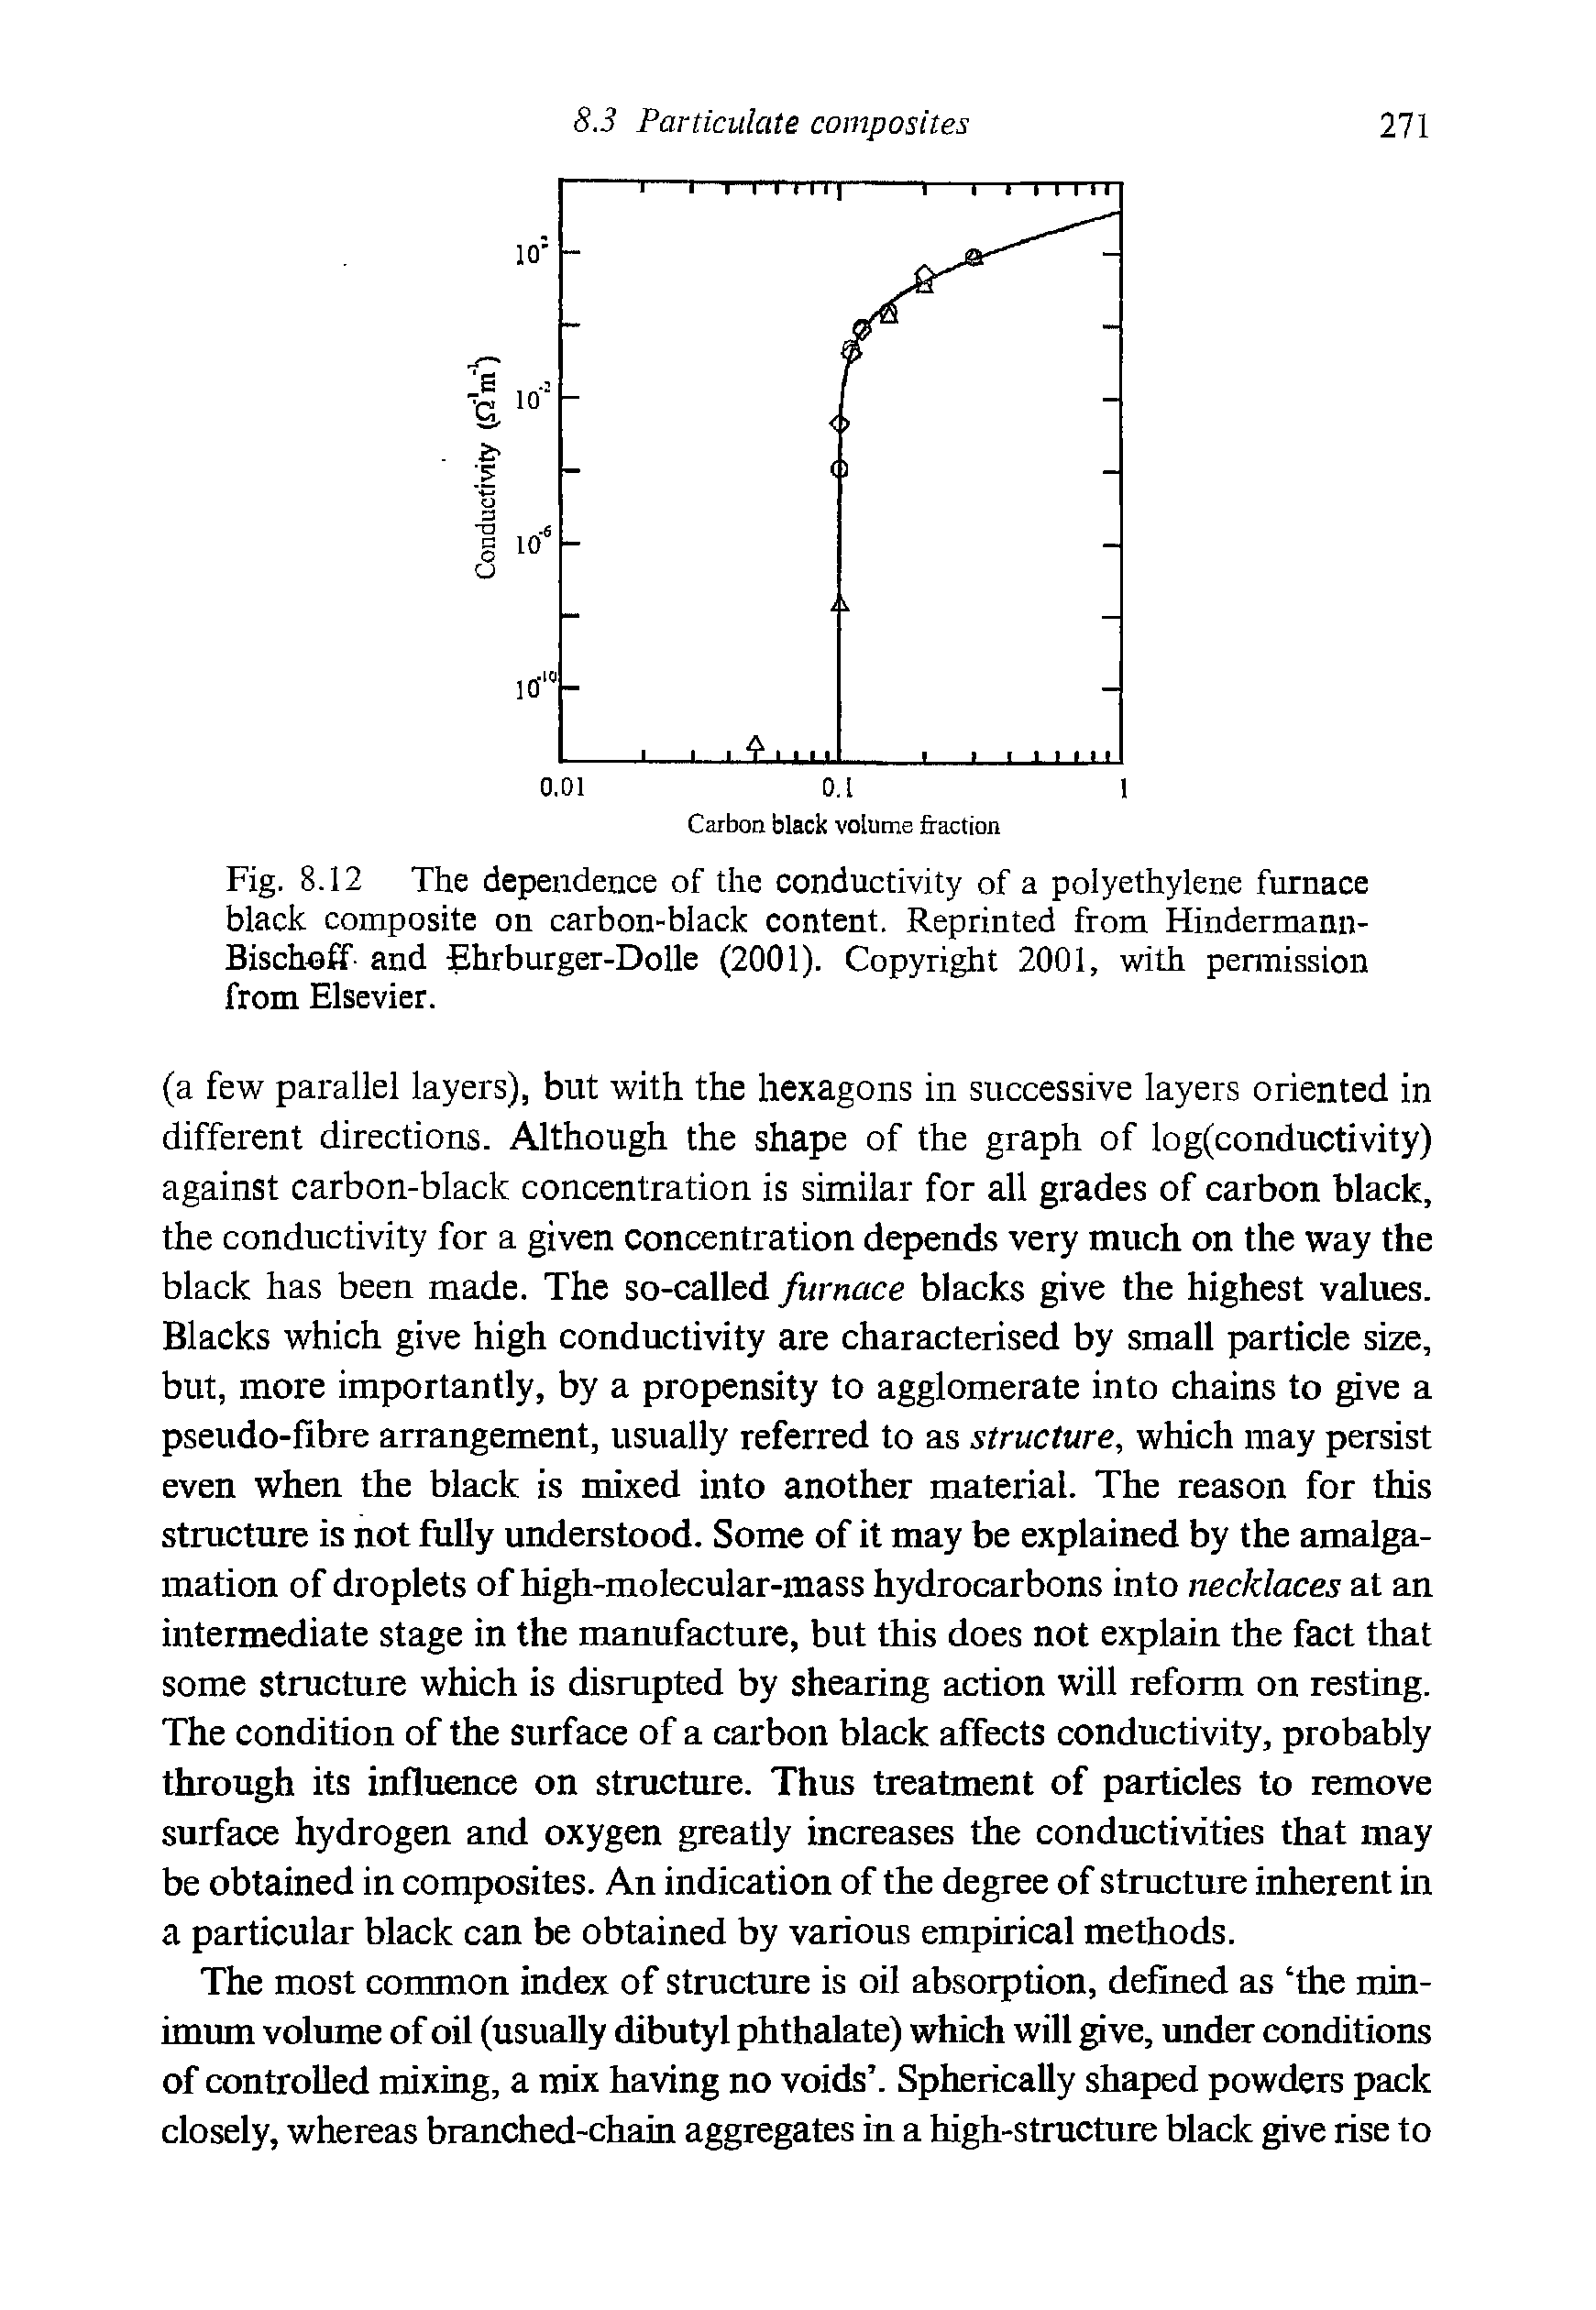 Fig. 8.12 The dependence of the conductivity of a polyethylene furnace black composite on carbon-black content. Reprinted from Hindermann-Bischoff and Ehrburger-Dolle (2001). Copyright 2001, with permission from Elsevier.